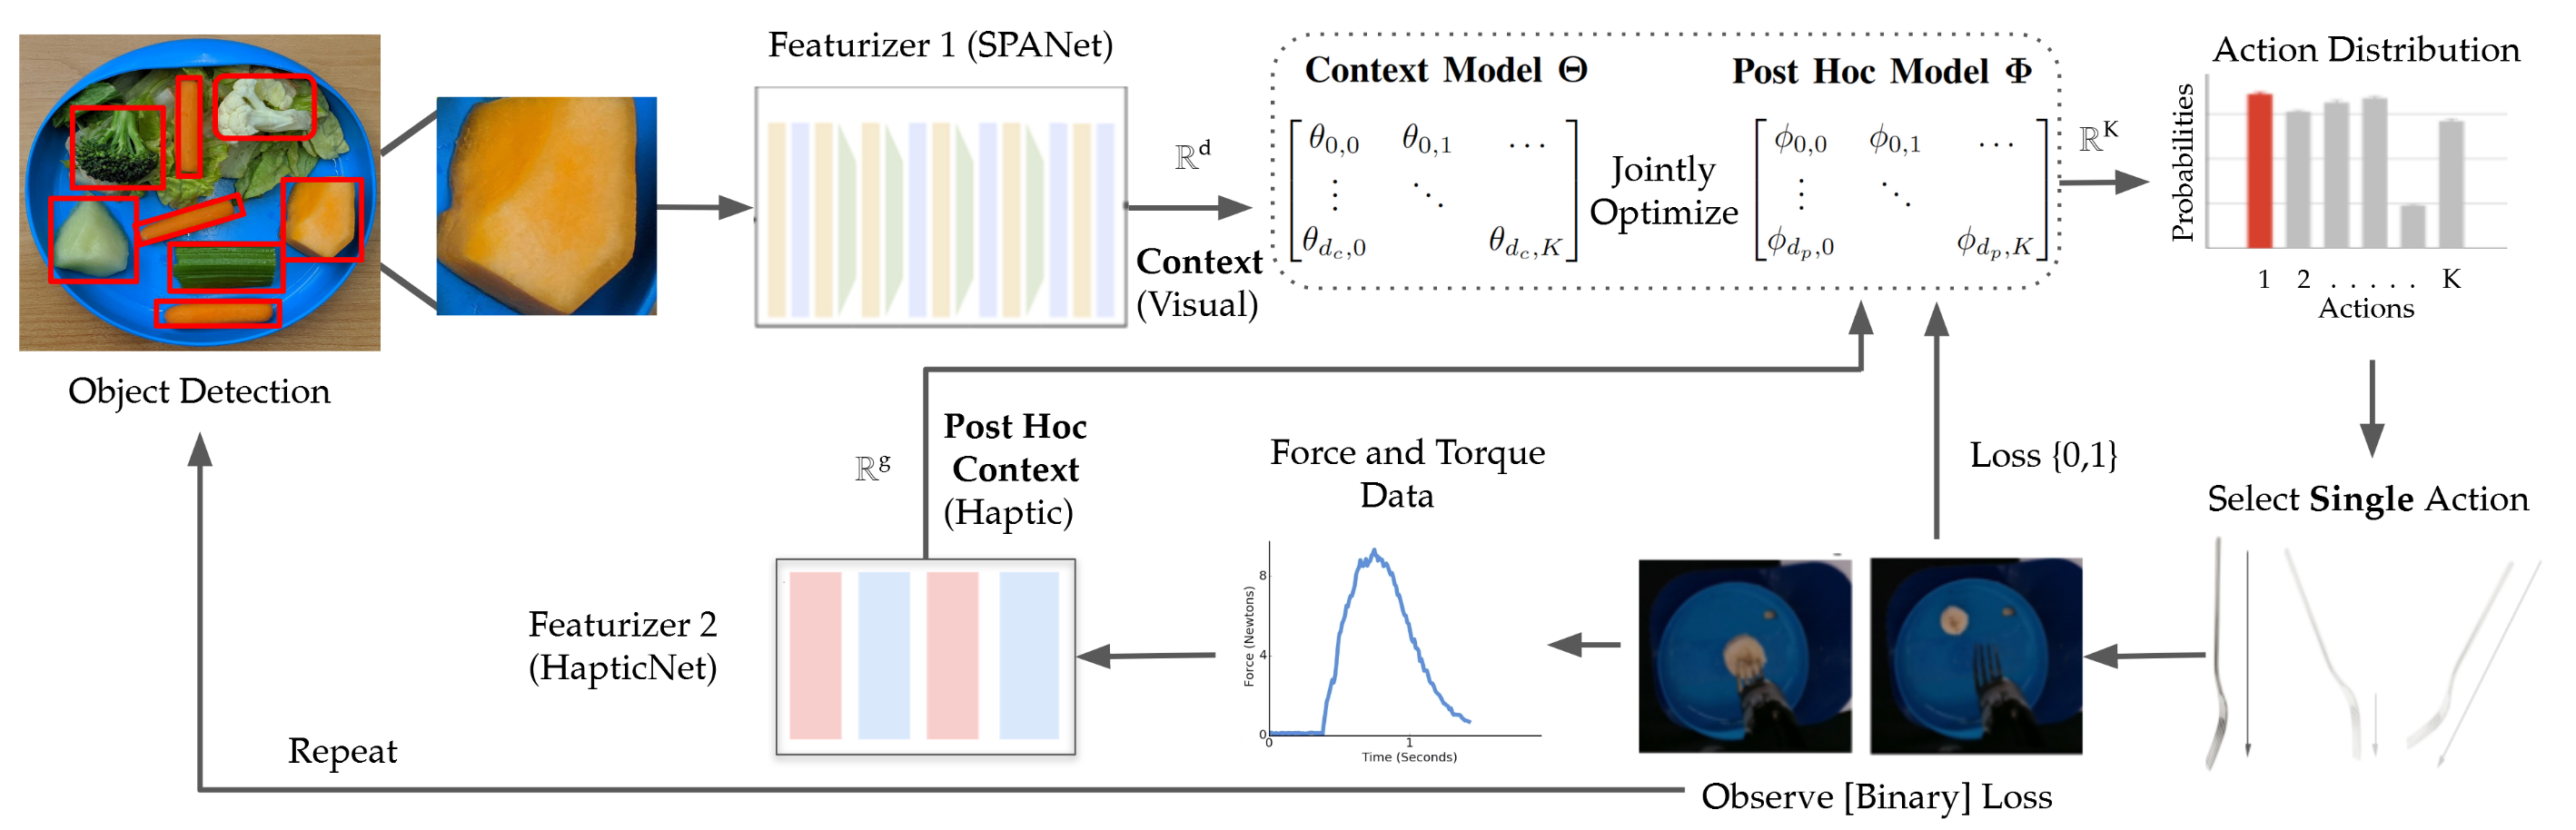 Leveraging Post Hoc Context for Faster Learning in Bandit Settings with Applications in Robot-Assisted Feeding